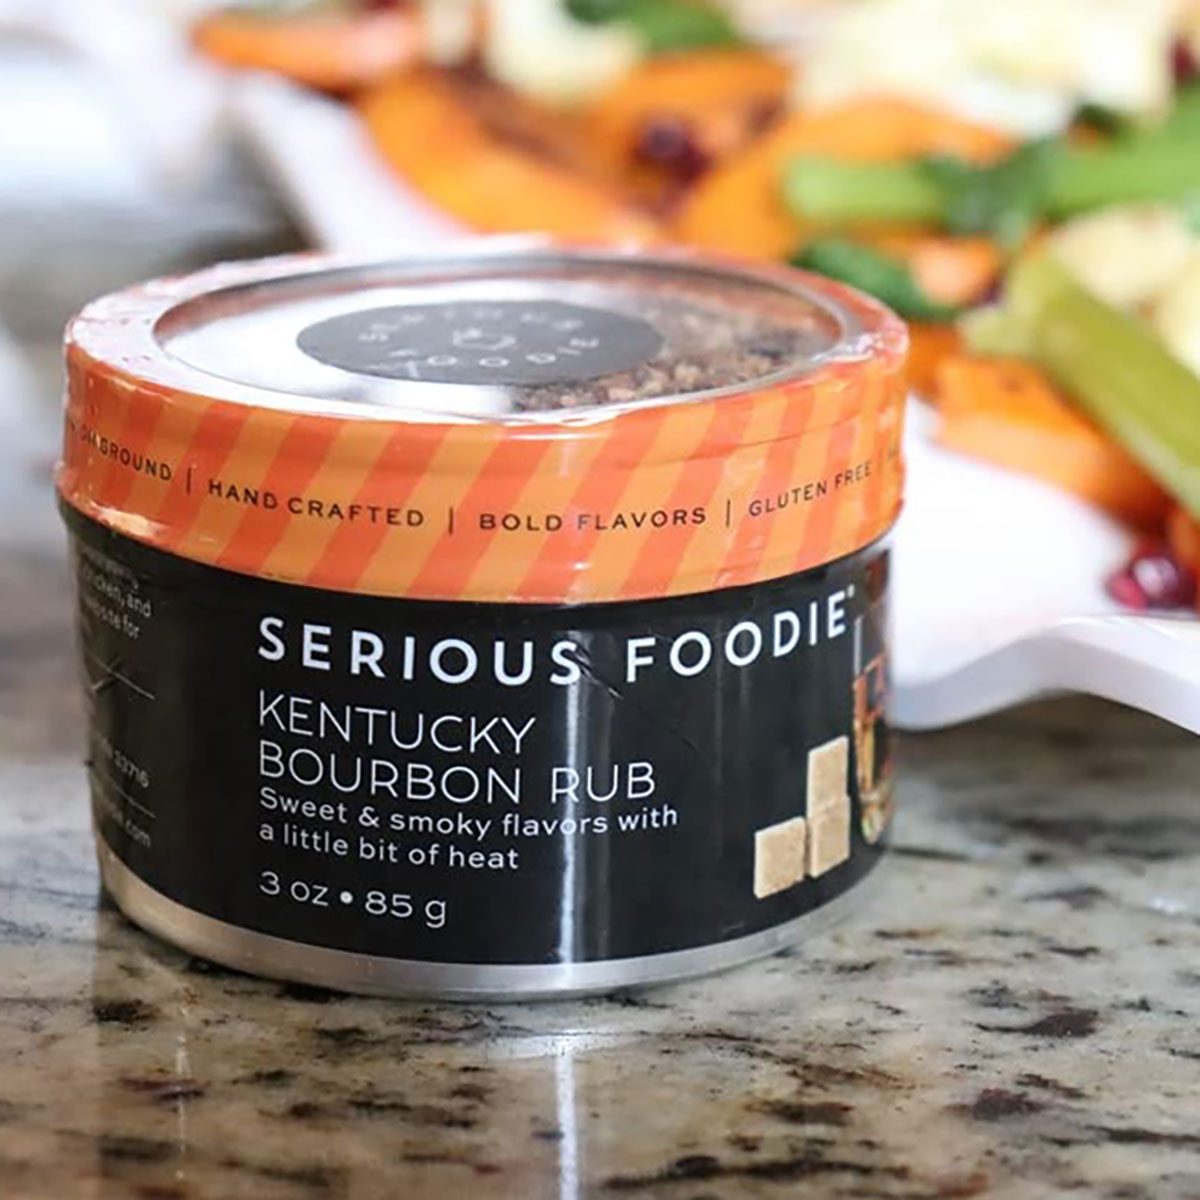 The Serious Foodie Spice Rubs